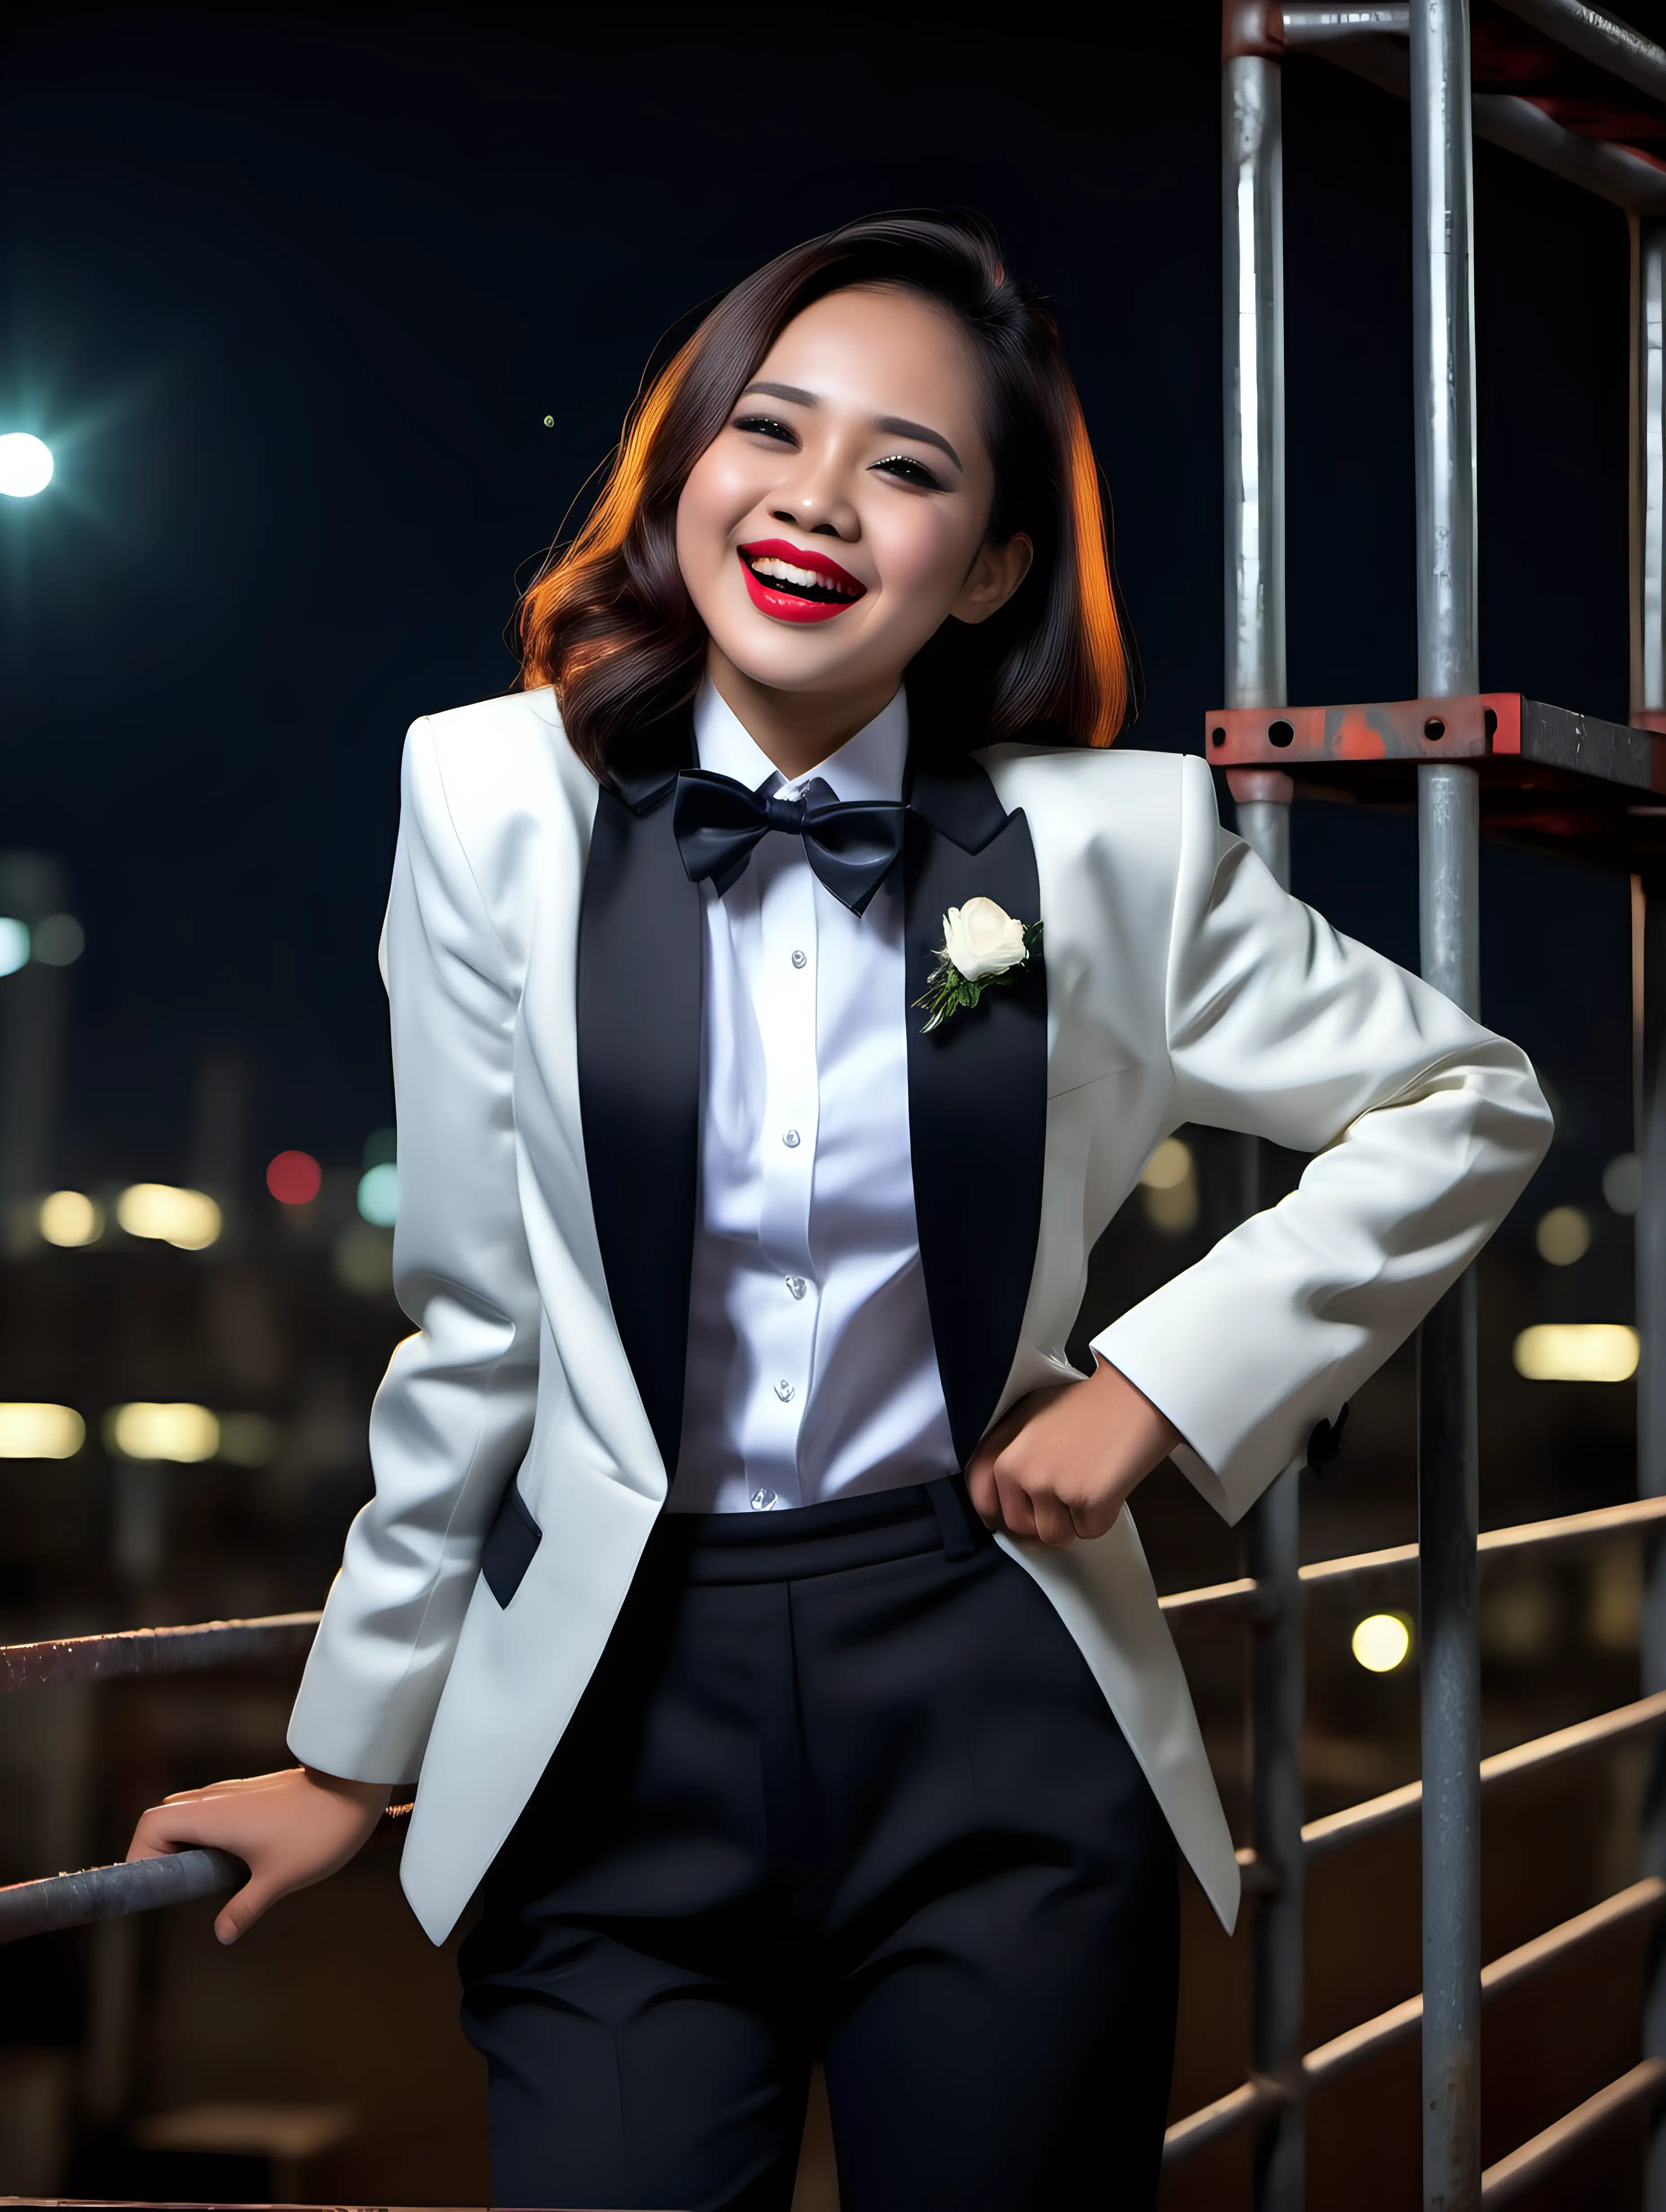 Sophisticated-Indonesian-Woman-Laughing-on-Scaffold-at-Night